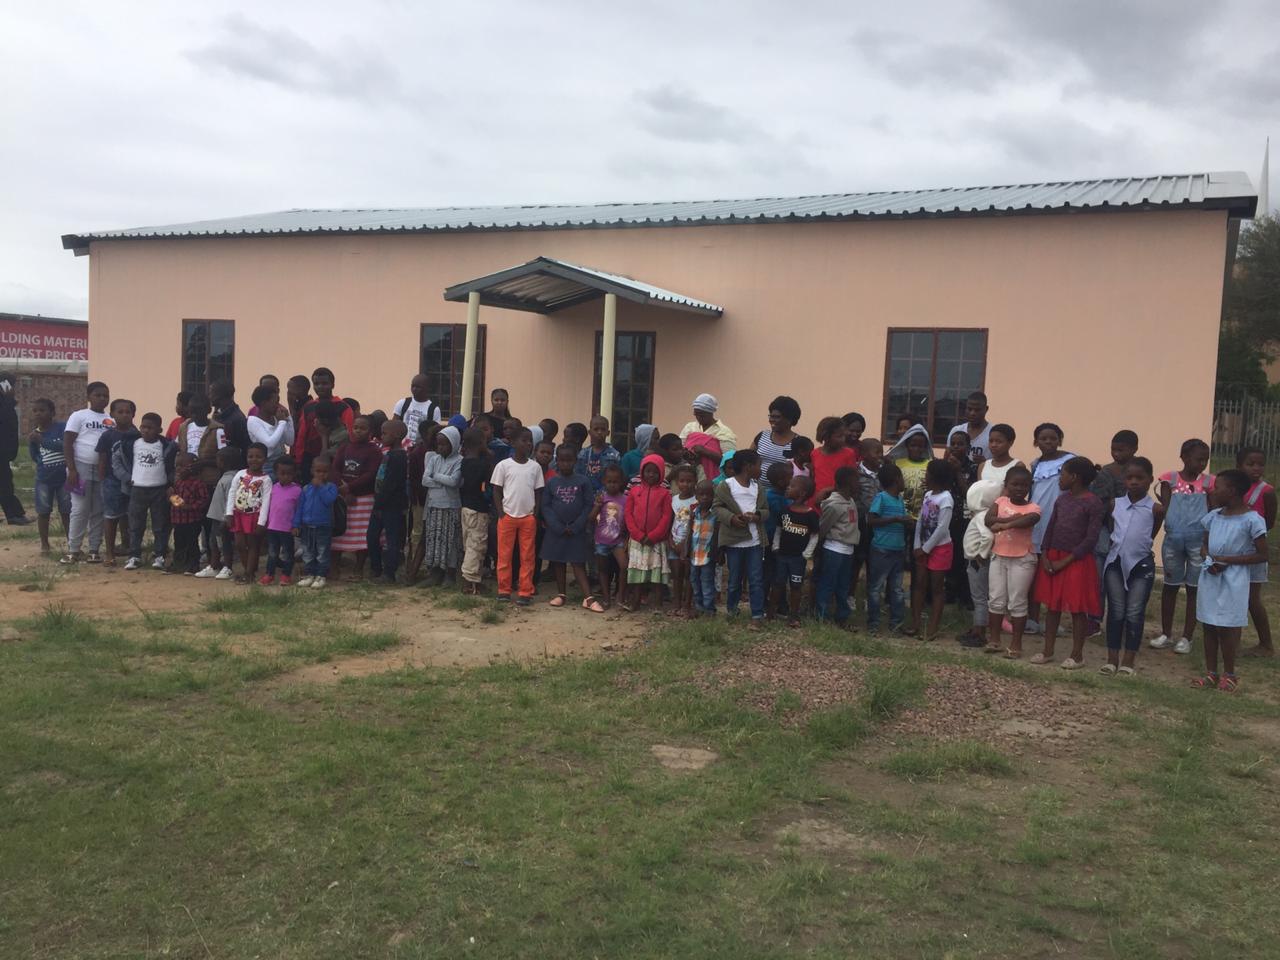 Lighthouse Hope Center in South Africa